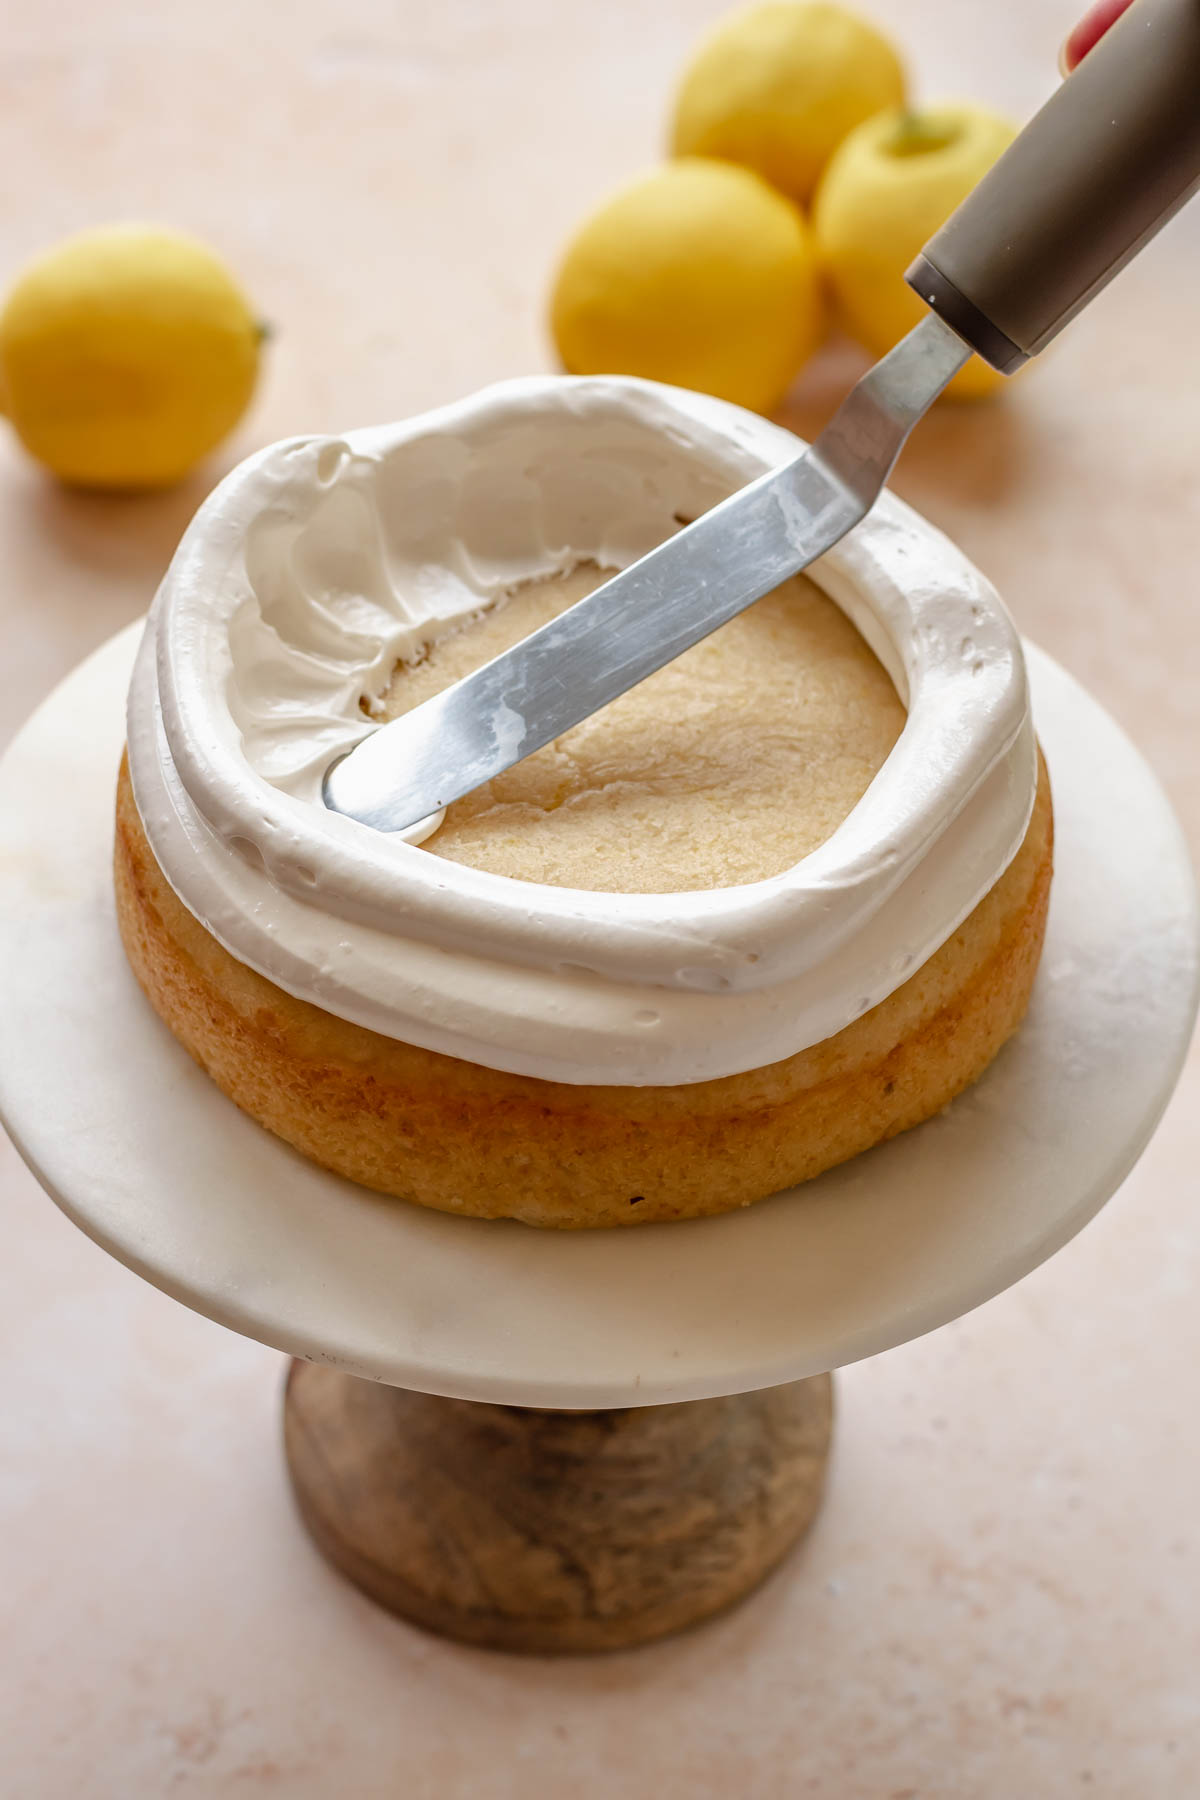 An offset spatula pulls meringue into the center of the cake.